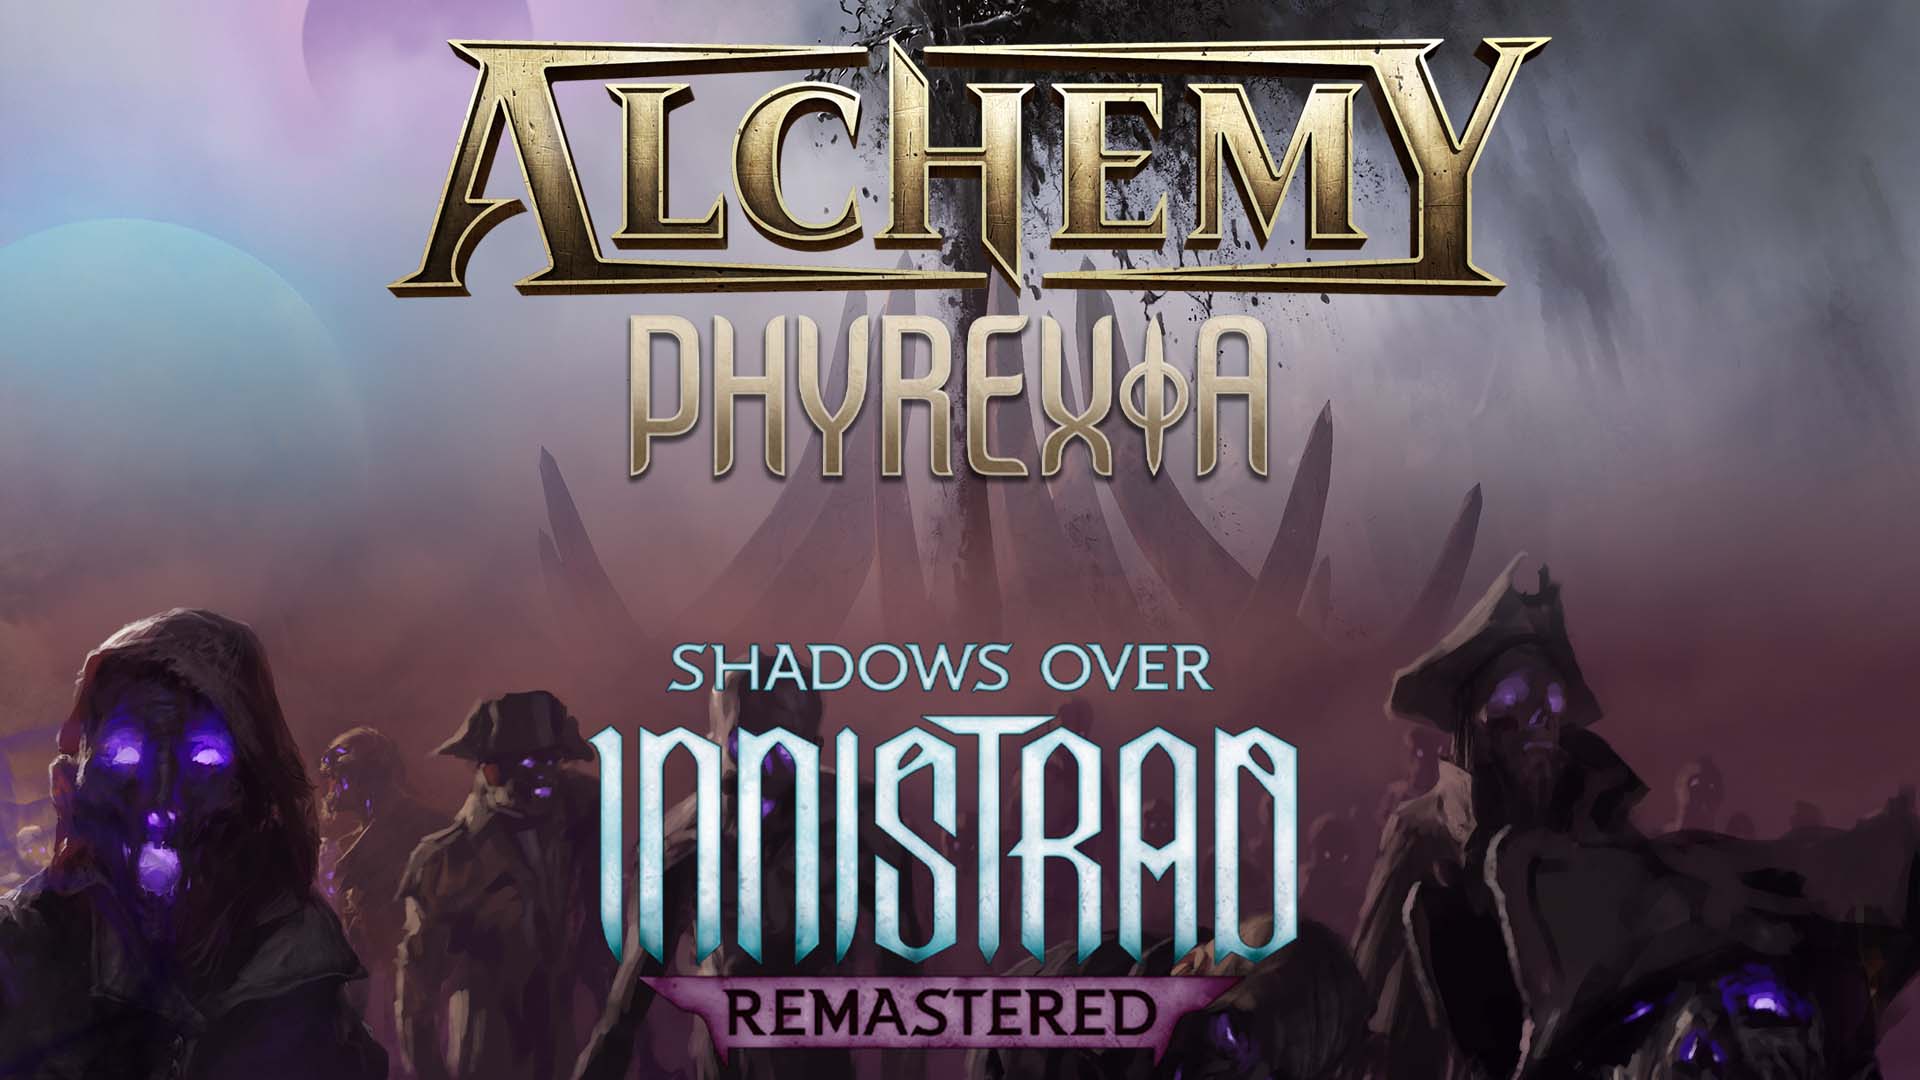 Tune in to Weekly MTG on twitch.tv/magic on February 21 for first looks at Alchemy: Phyrexia and Shadows over Innistrad Remastered